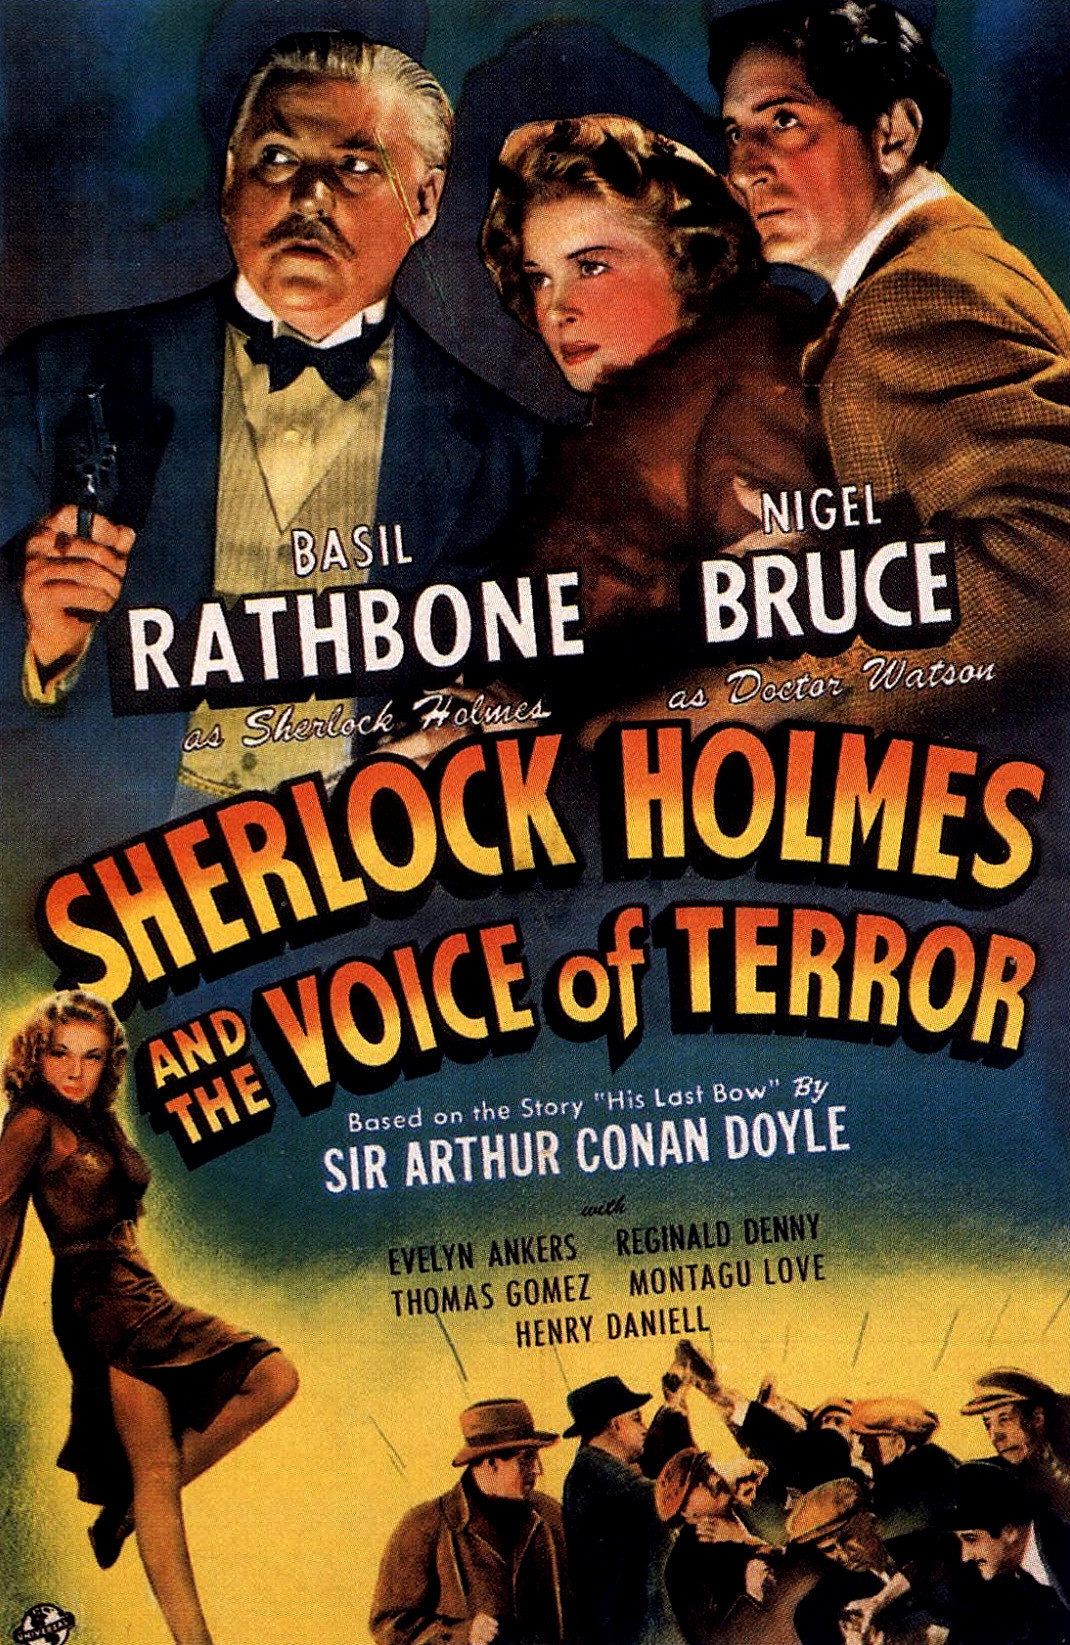 Sherlock Holmes and the Voice of Terror (1942) Screenshot 5